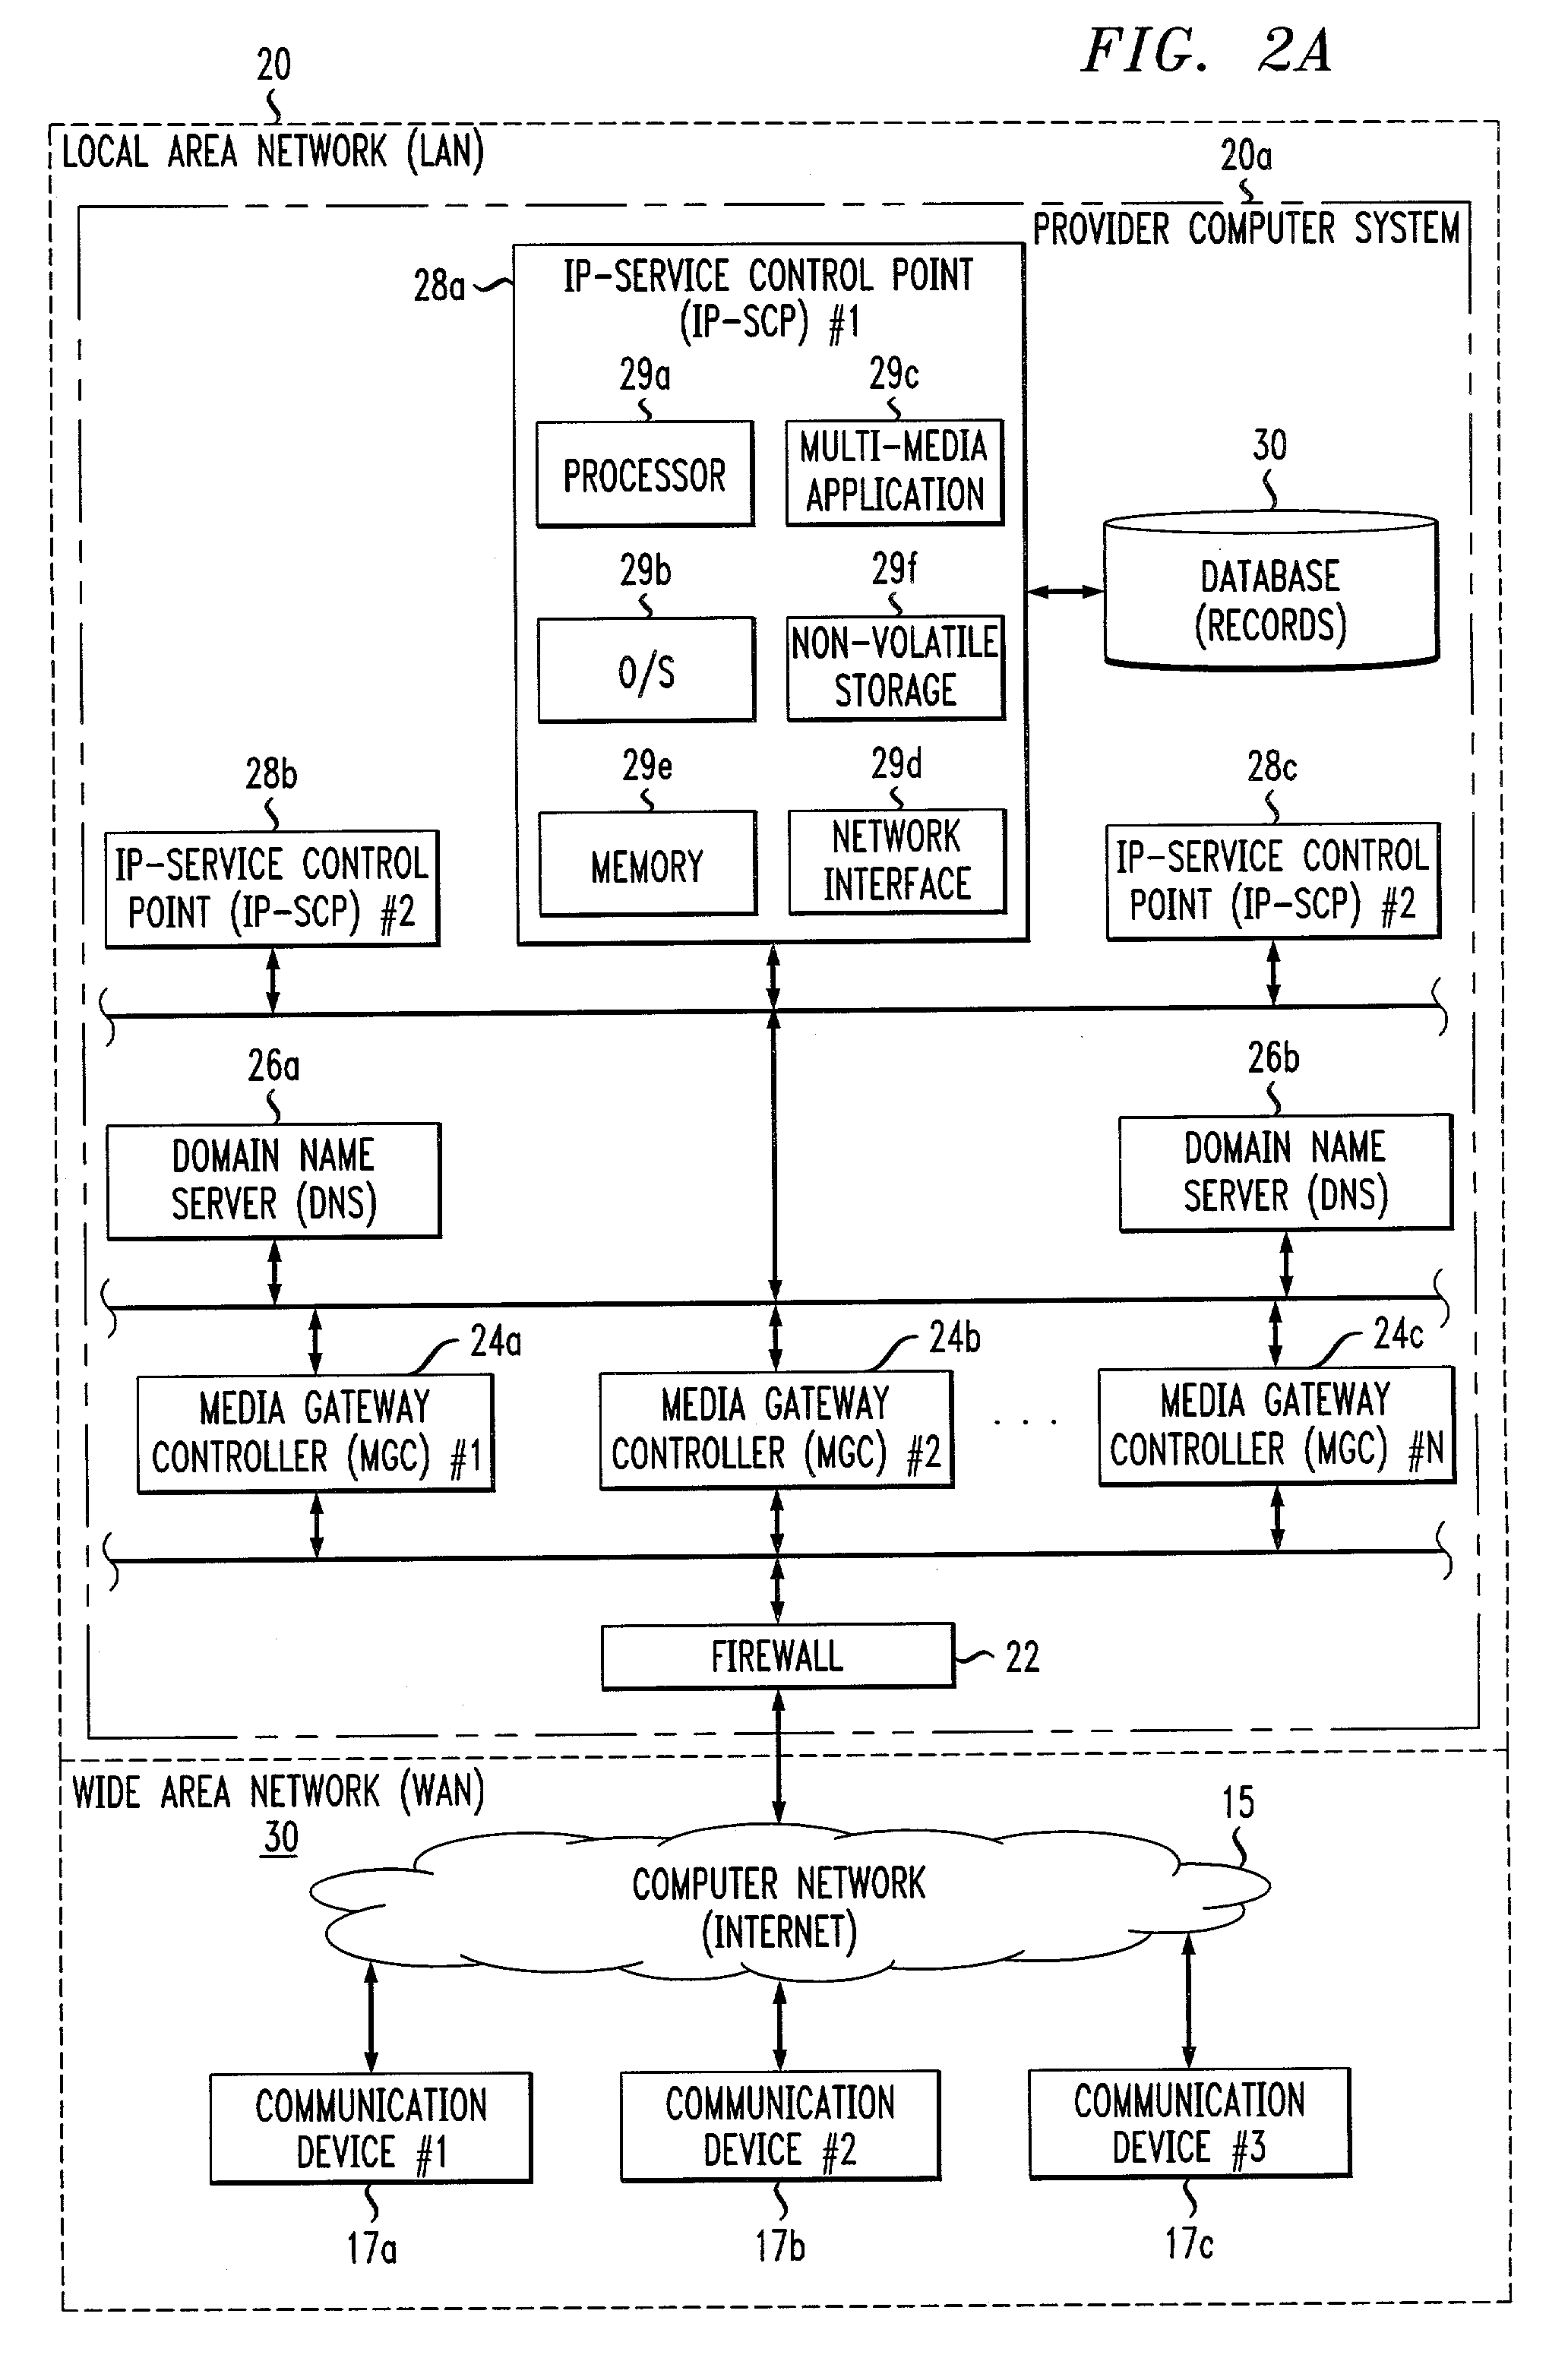 System and method for providing multi-media services to communication devices over a communications network